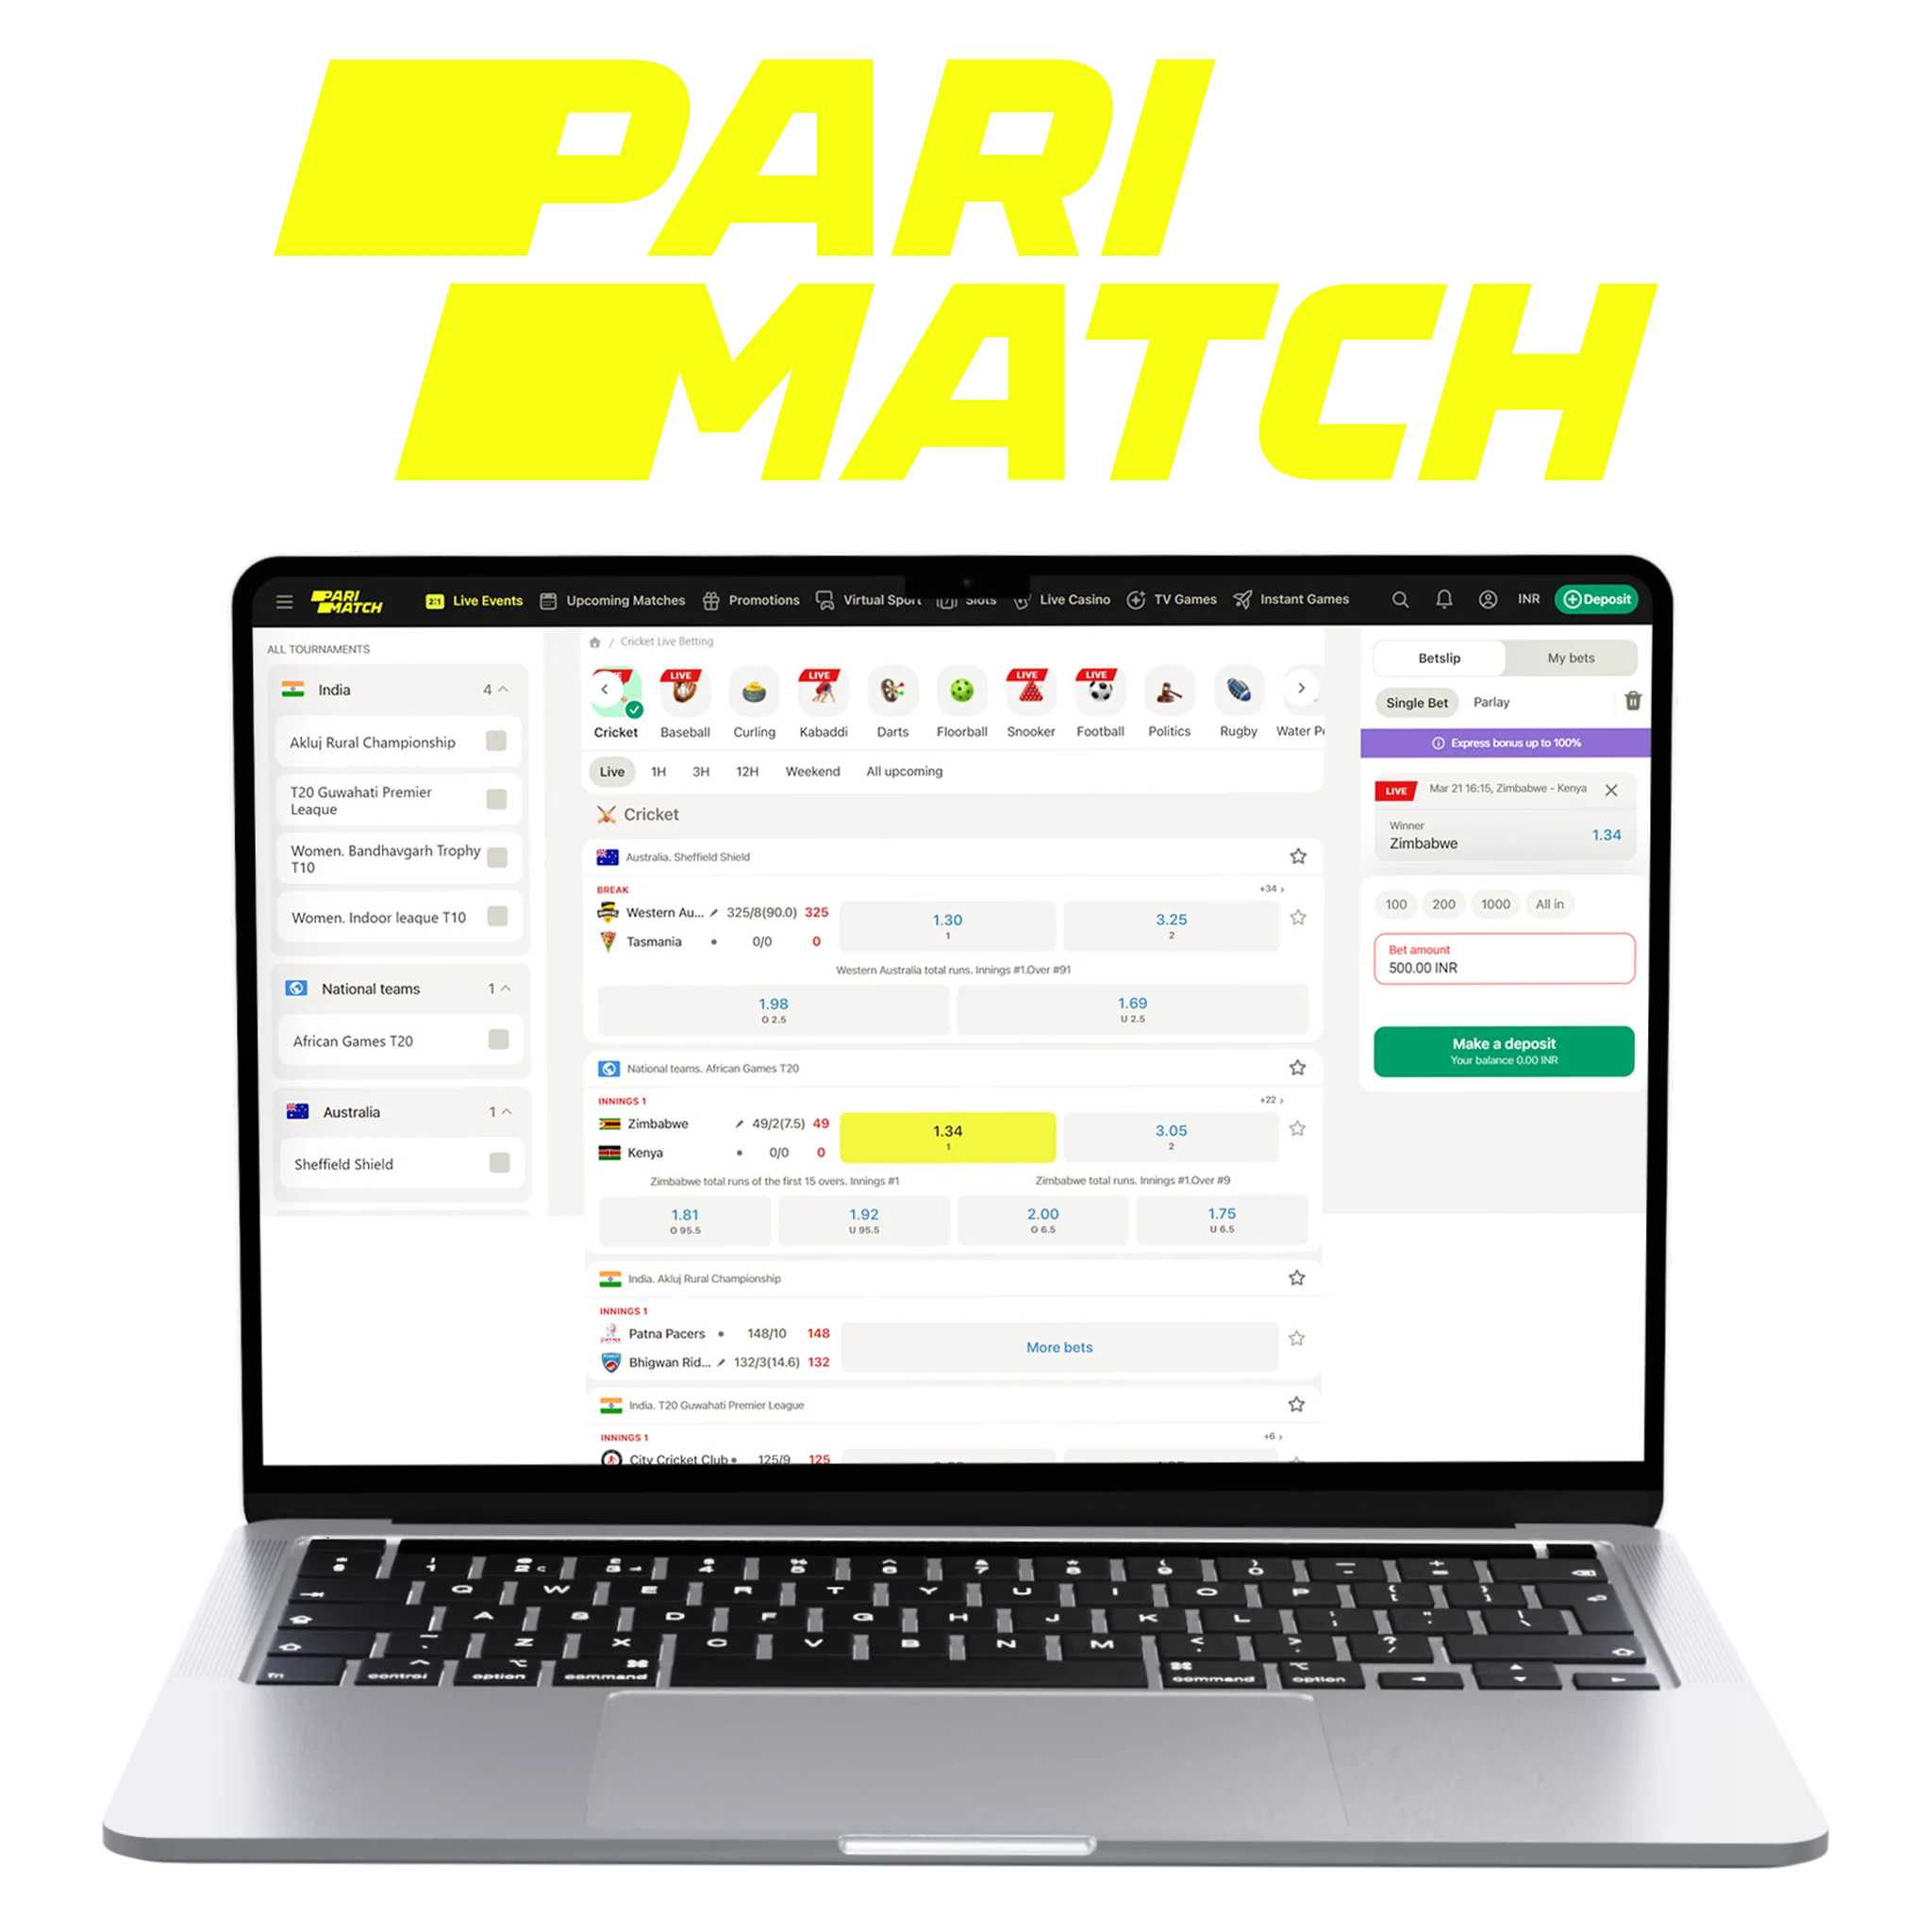 Parimatch gives the best possible odds for every interested player.